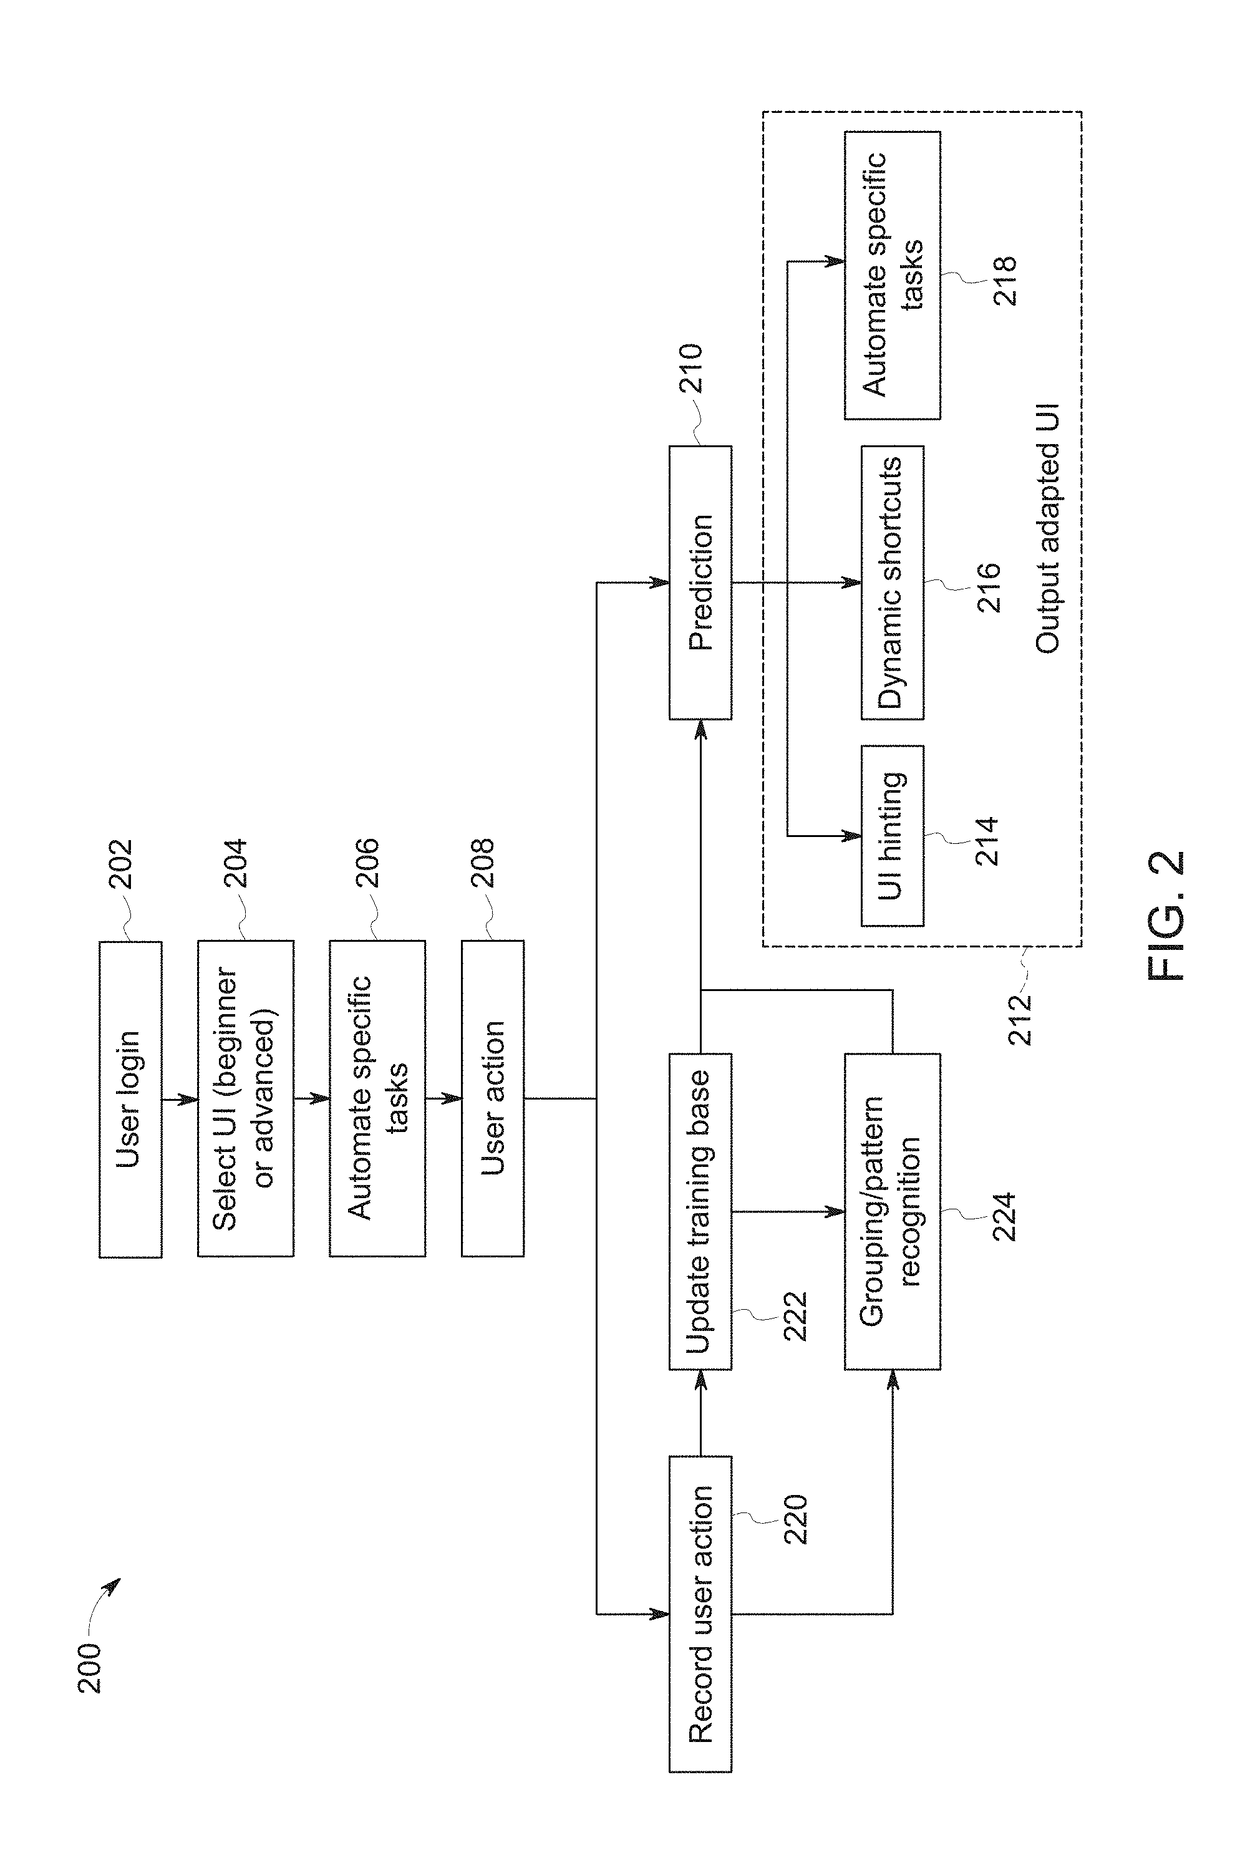 Systems and methods for adaptive user interfaces